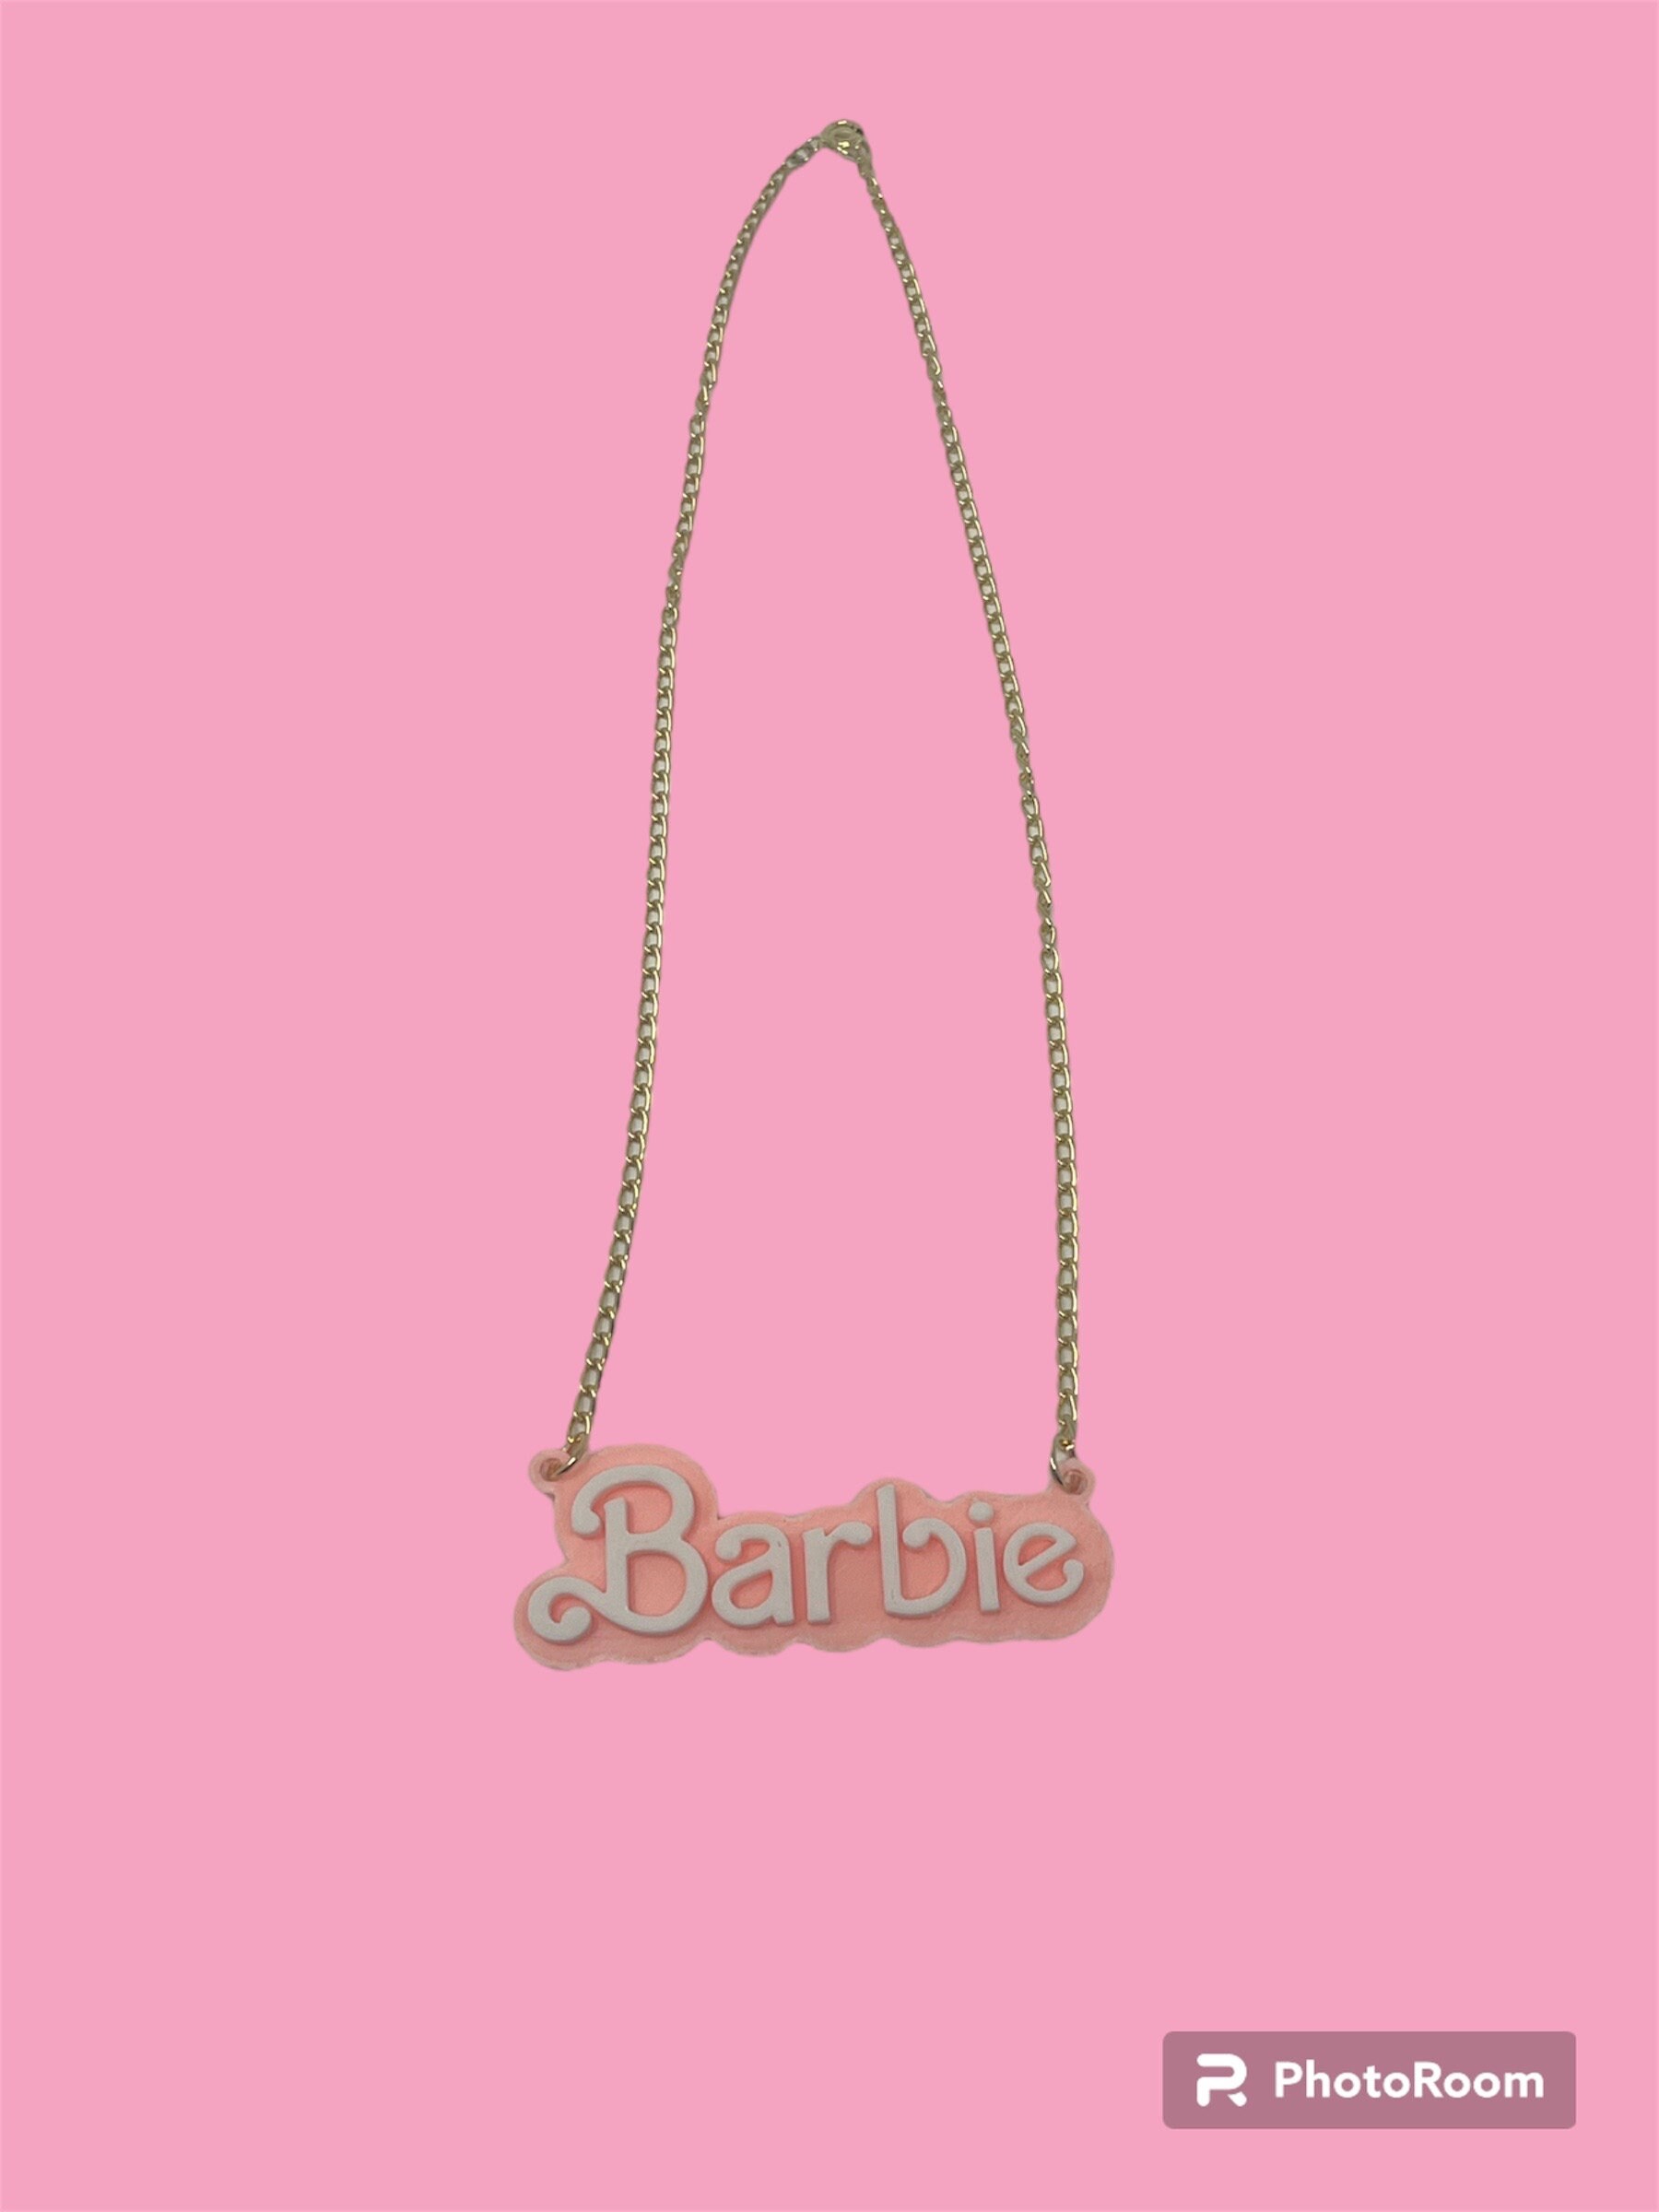 Personalized Gold CircleBarbie Necklace Round Necklace Girls Barbie Movie  Pink